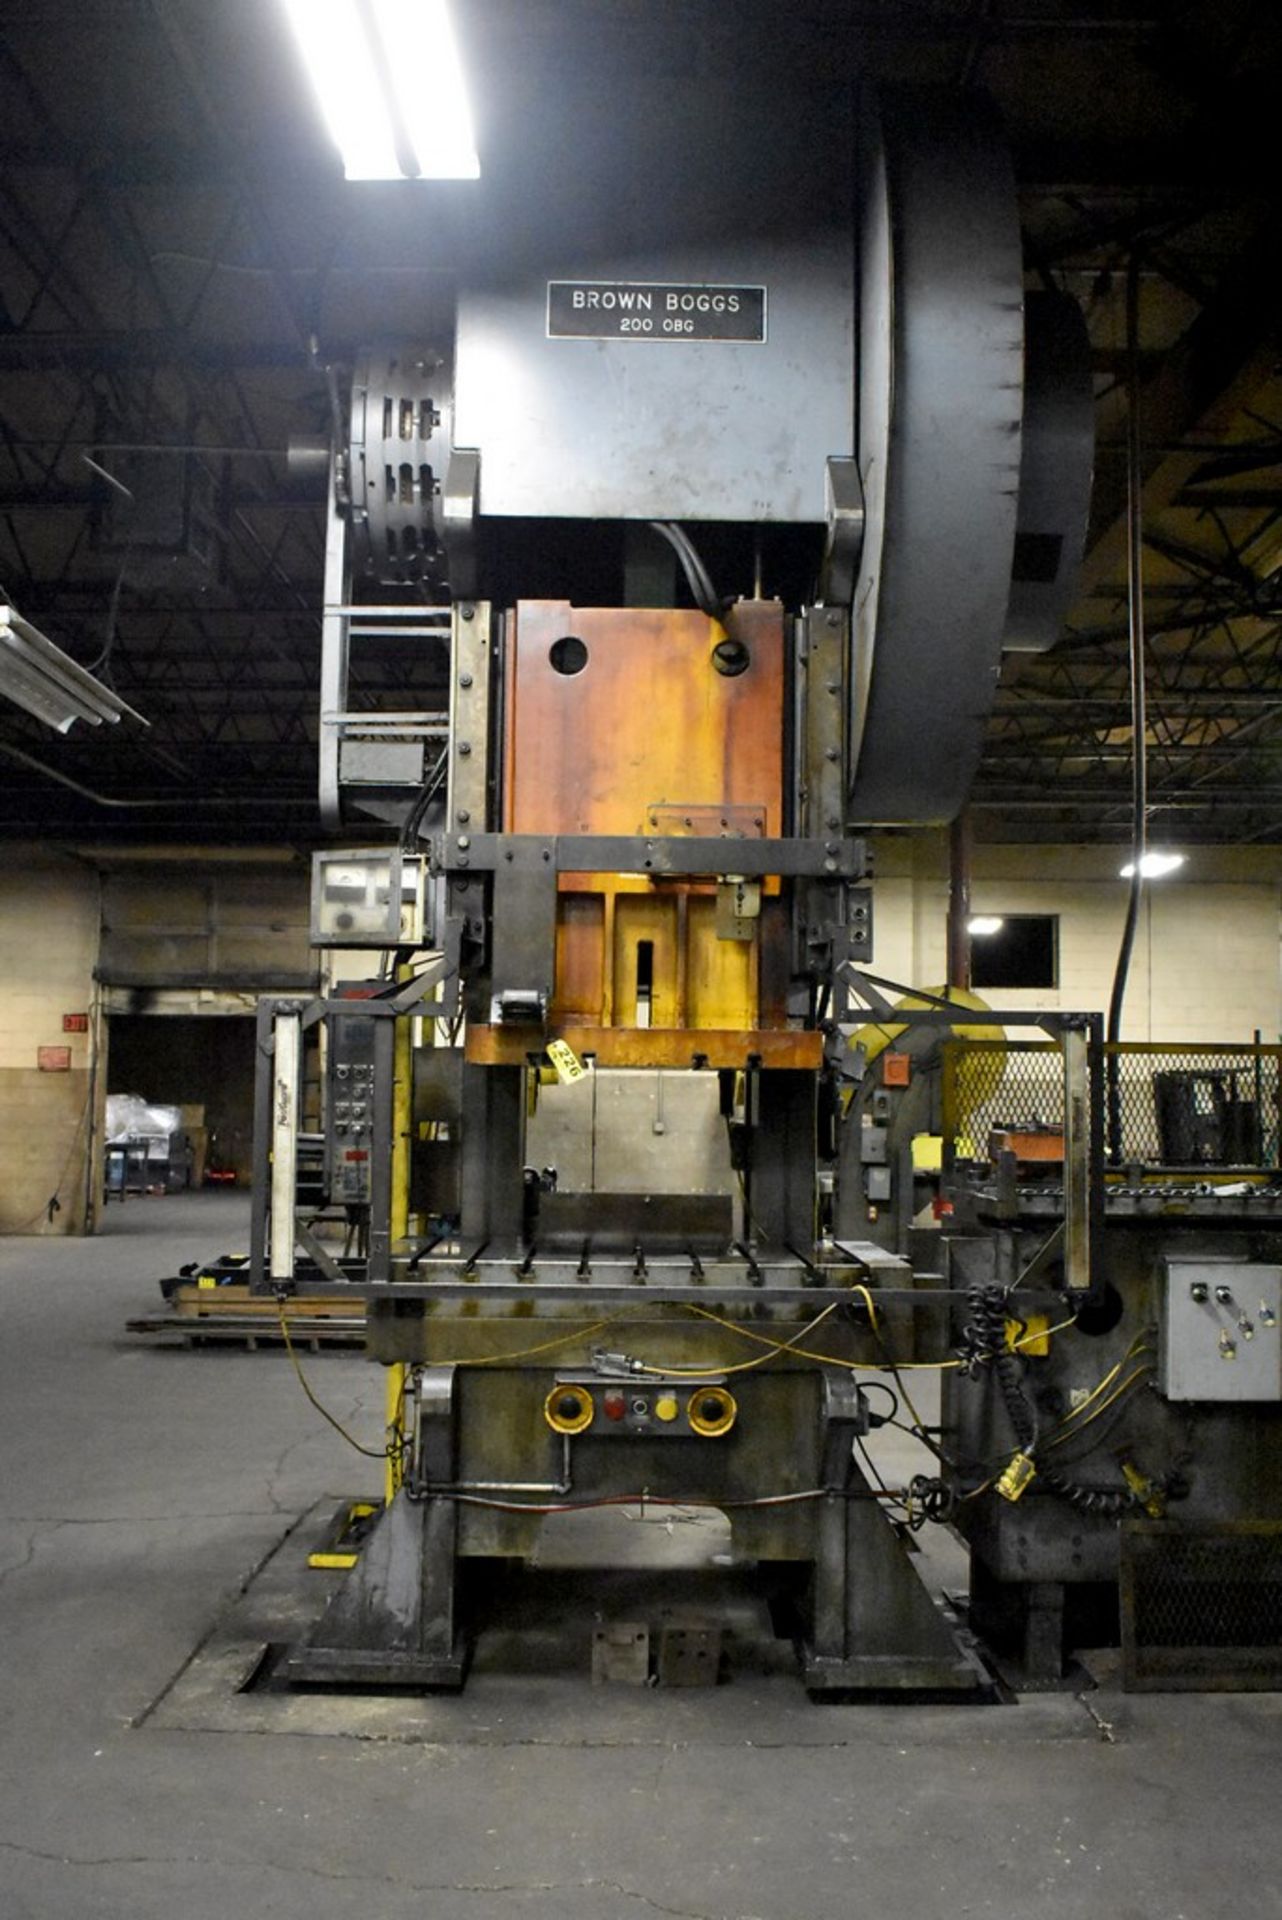 Brown & Boggs Model GAP200-8G Back Geared Gap Frame Punch Press, 200 Ton - 8" Stroke - 34" x 58" Bed - Image 2 of 15